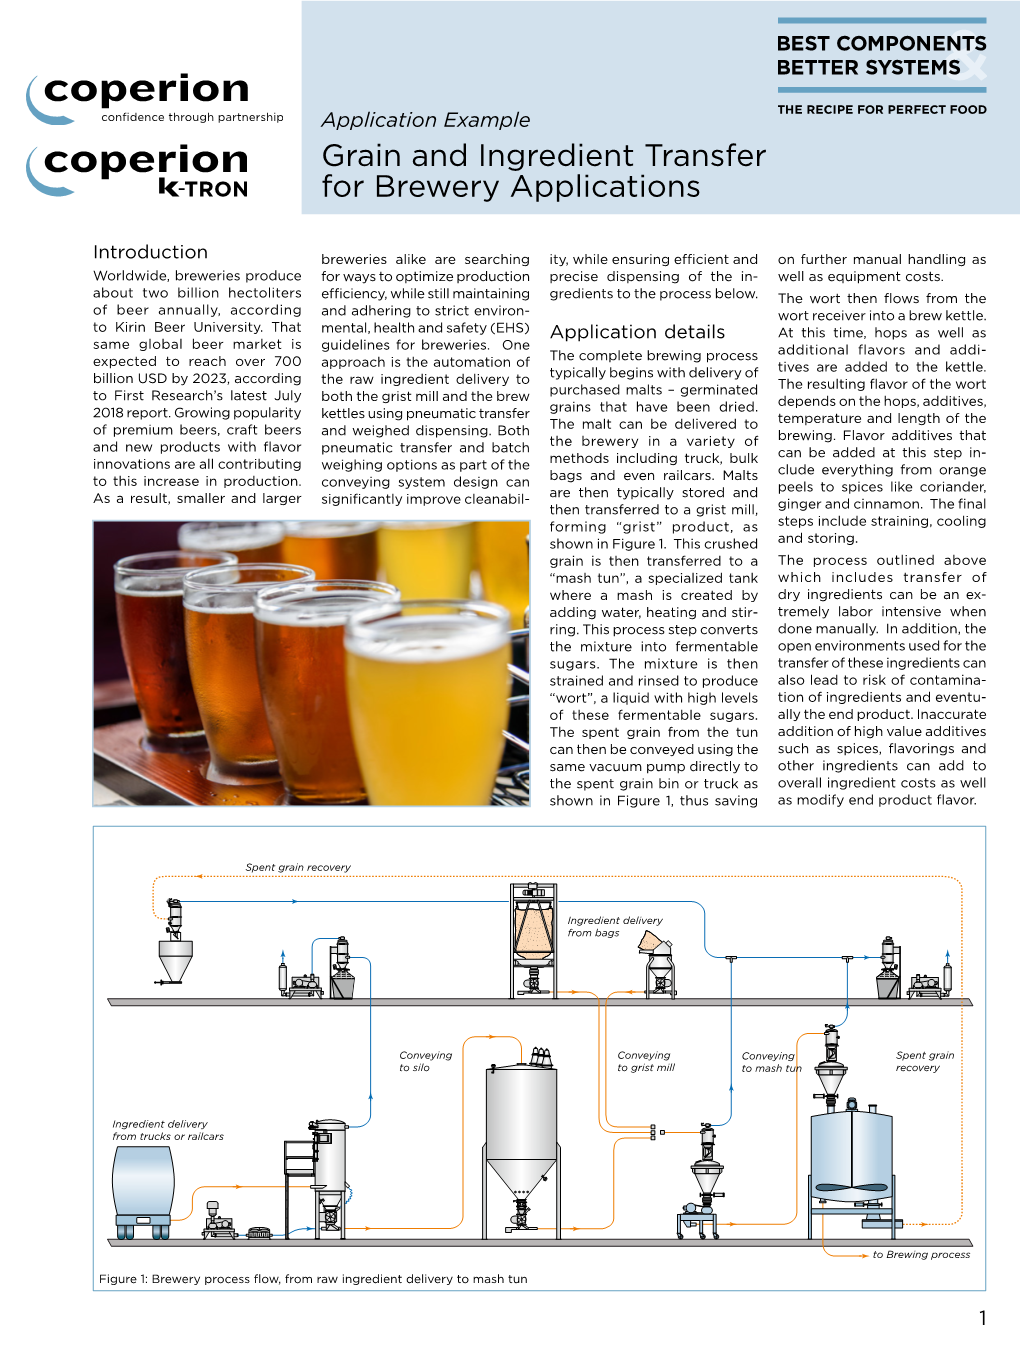 Grain and Ingredient Transfer for Brewery Applications